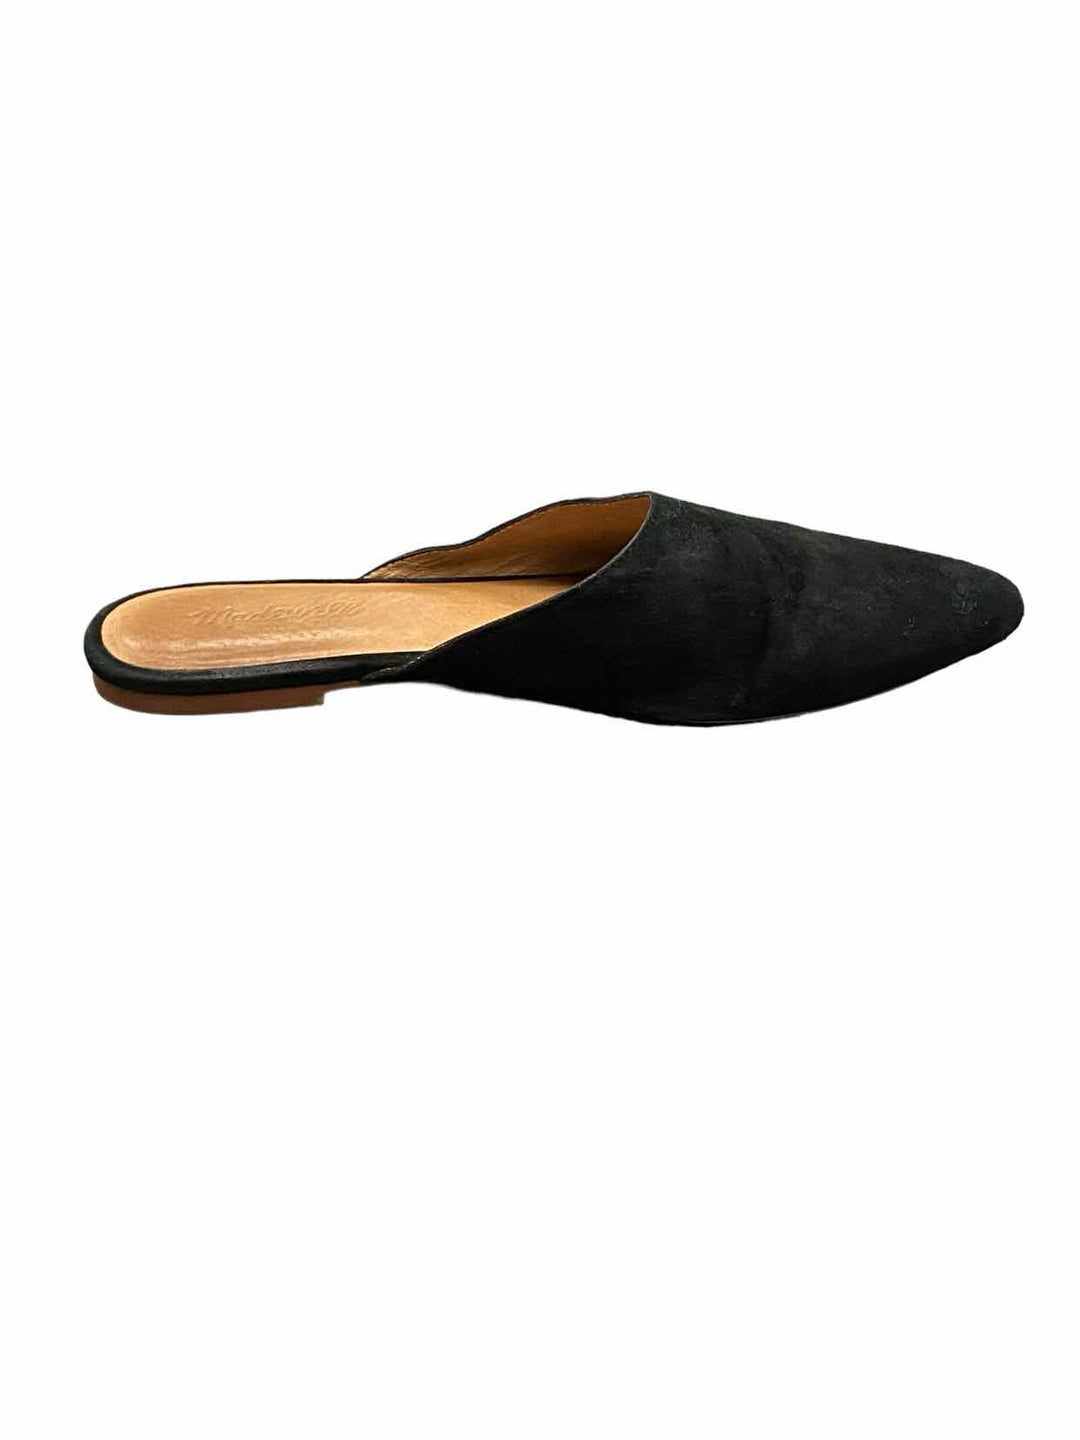 Madewell Shoe Size 6 Black Suede Flats